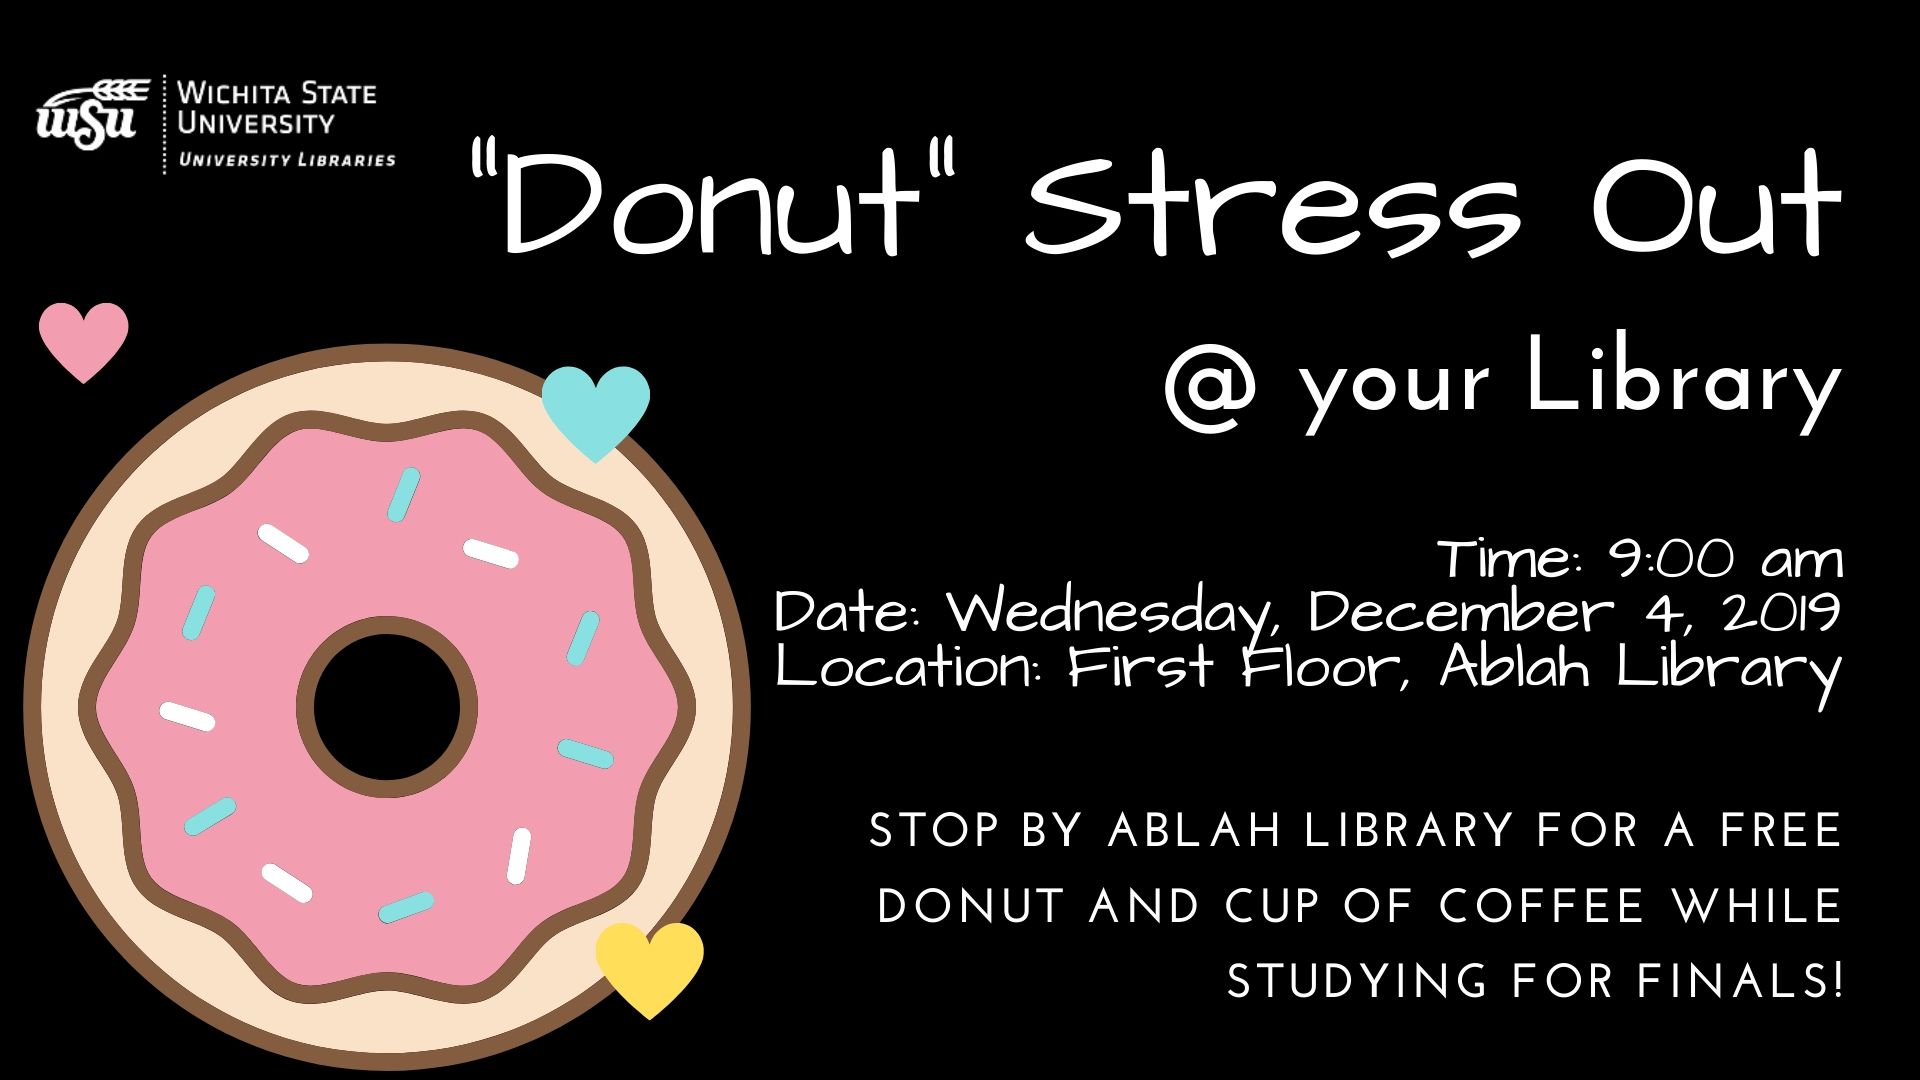 Come get a free doughnut and coffee on Dec. 4 in Albah Library